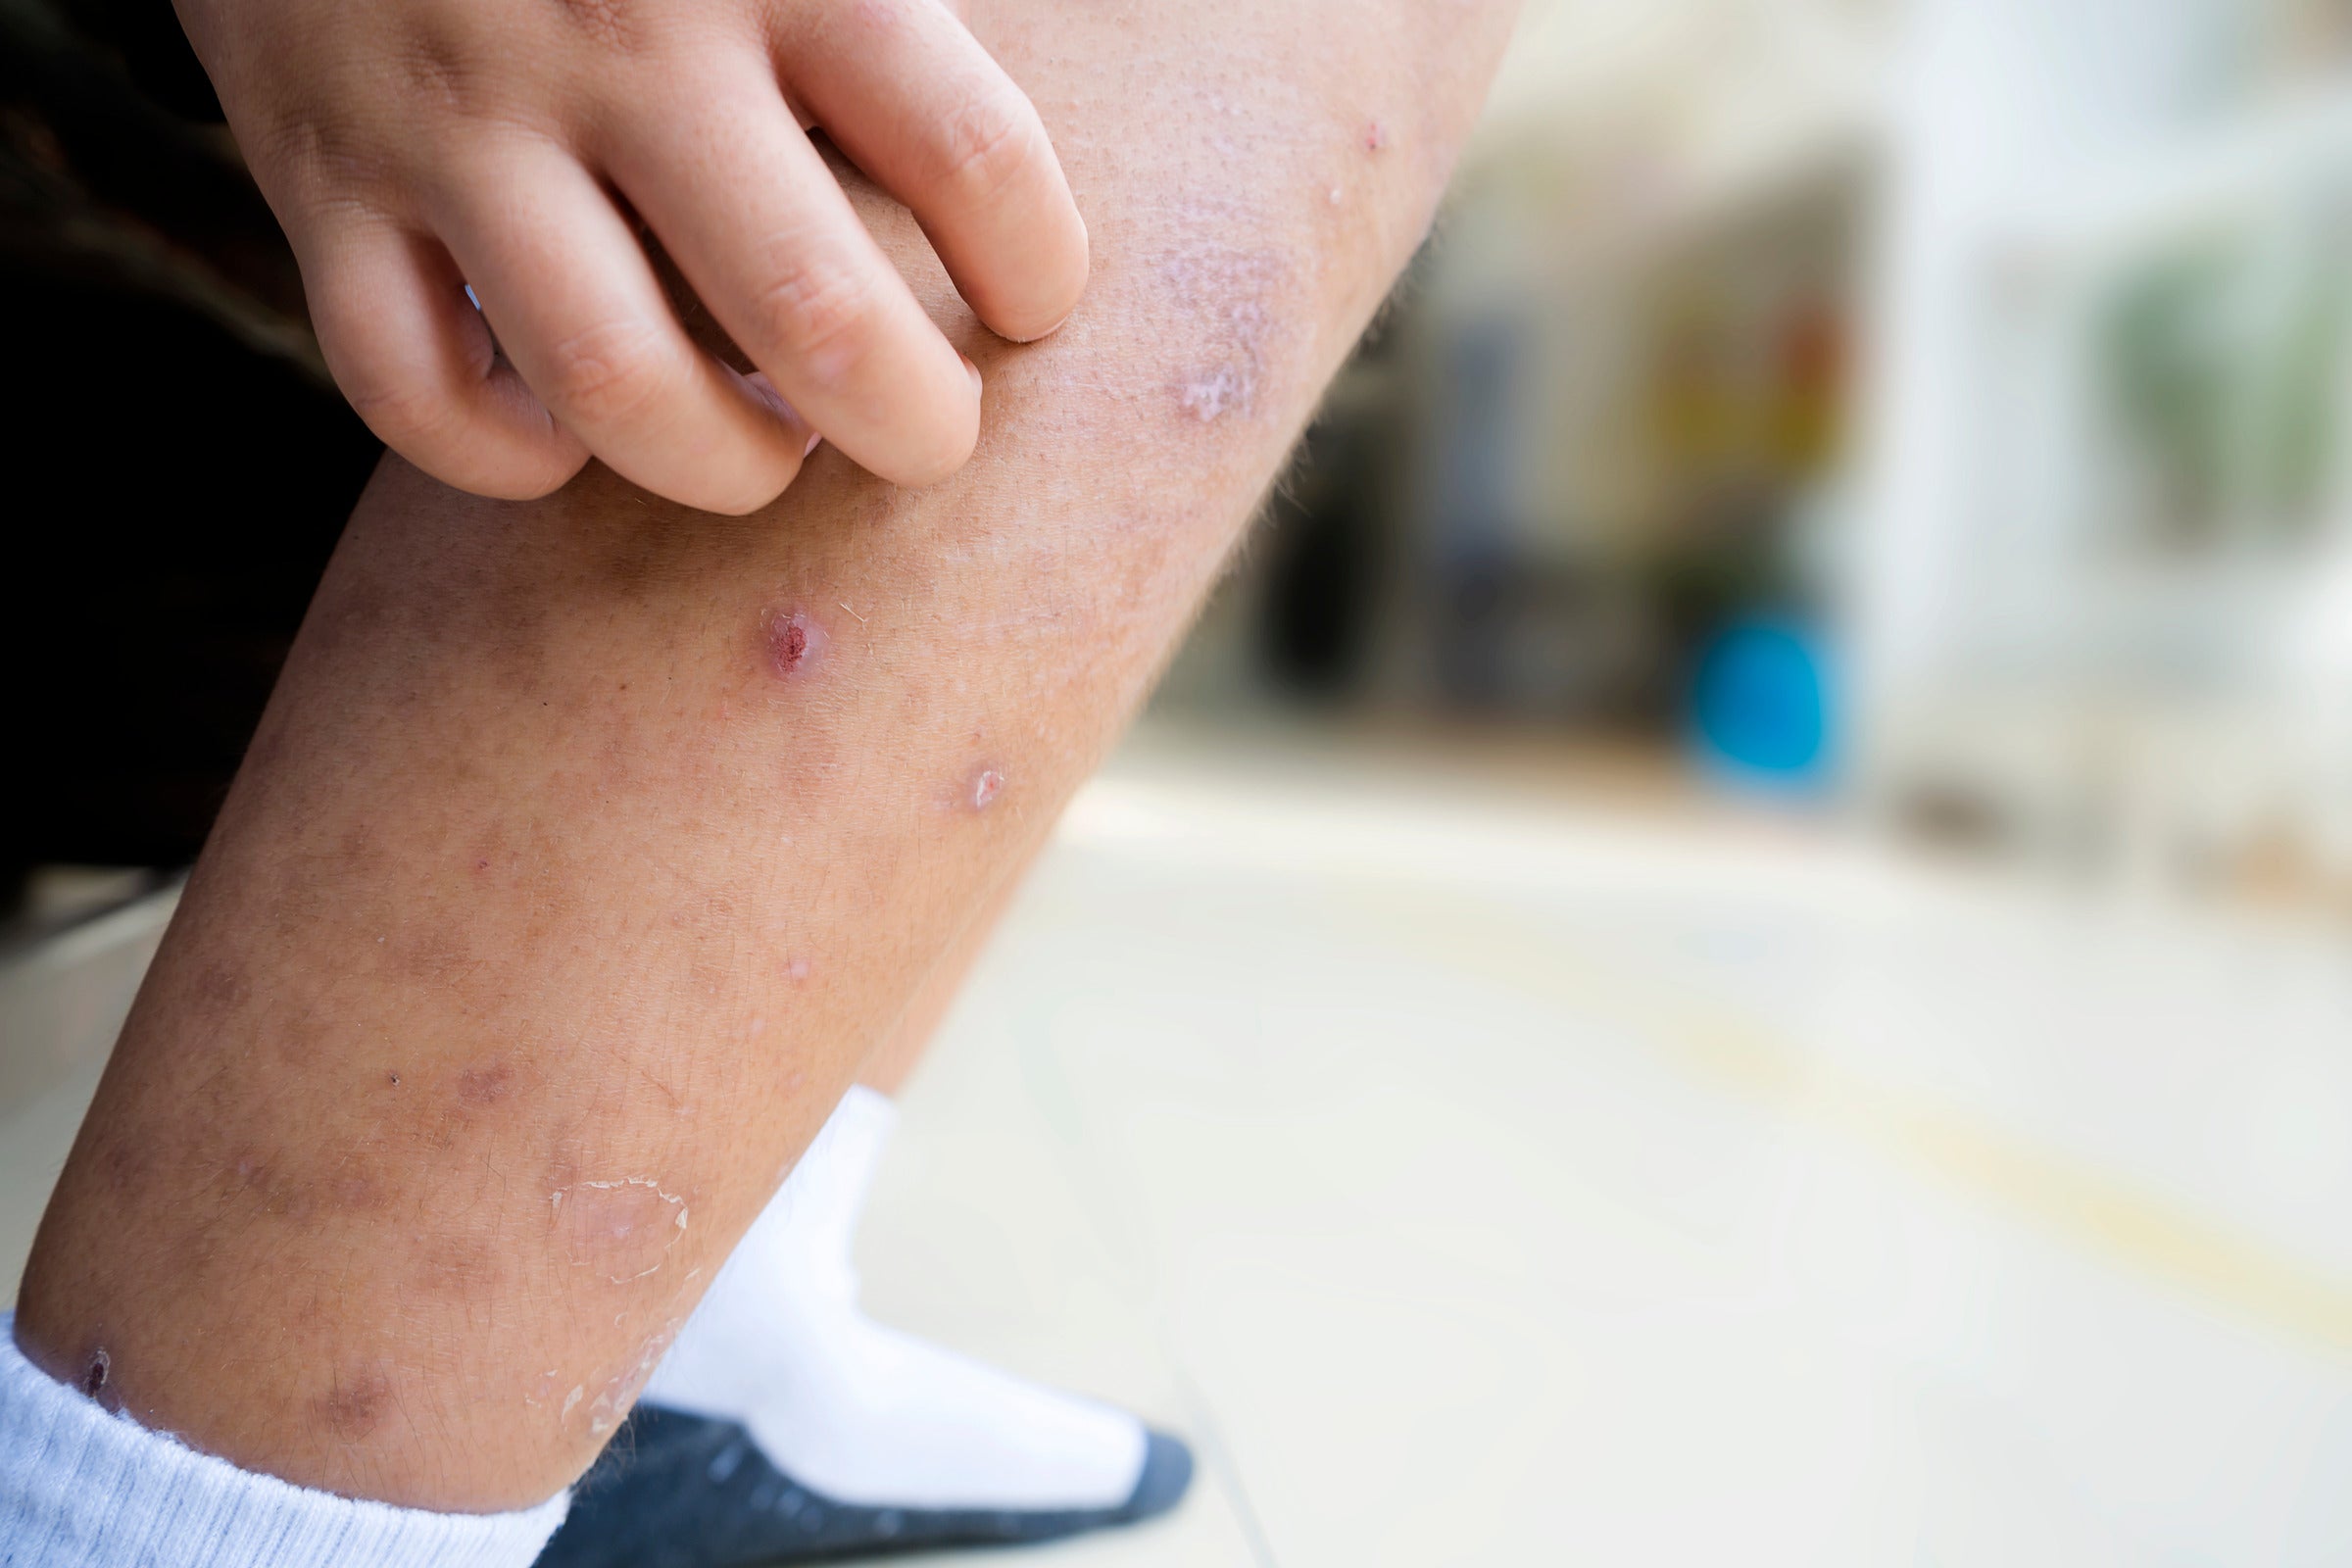 5 Methods For Preventing Insect Bites From Scarring